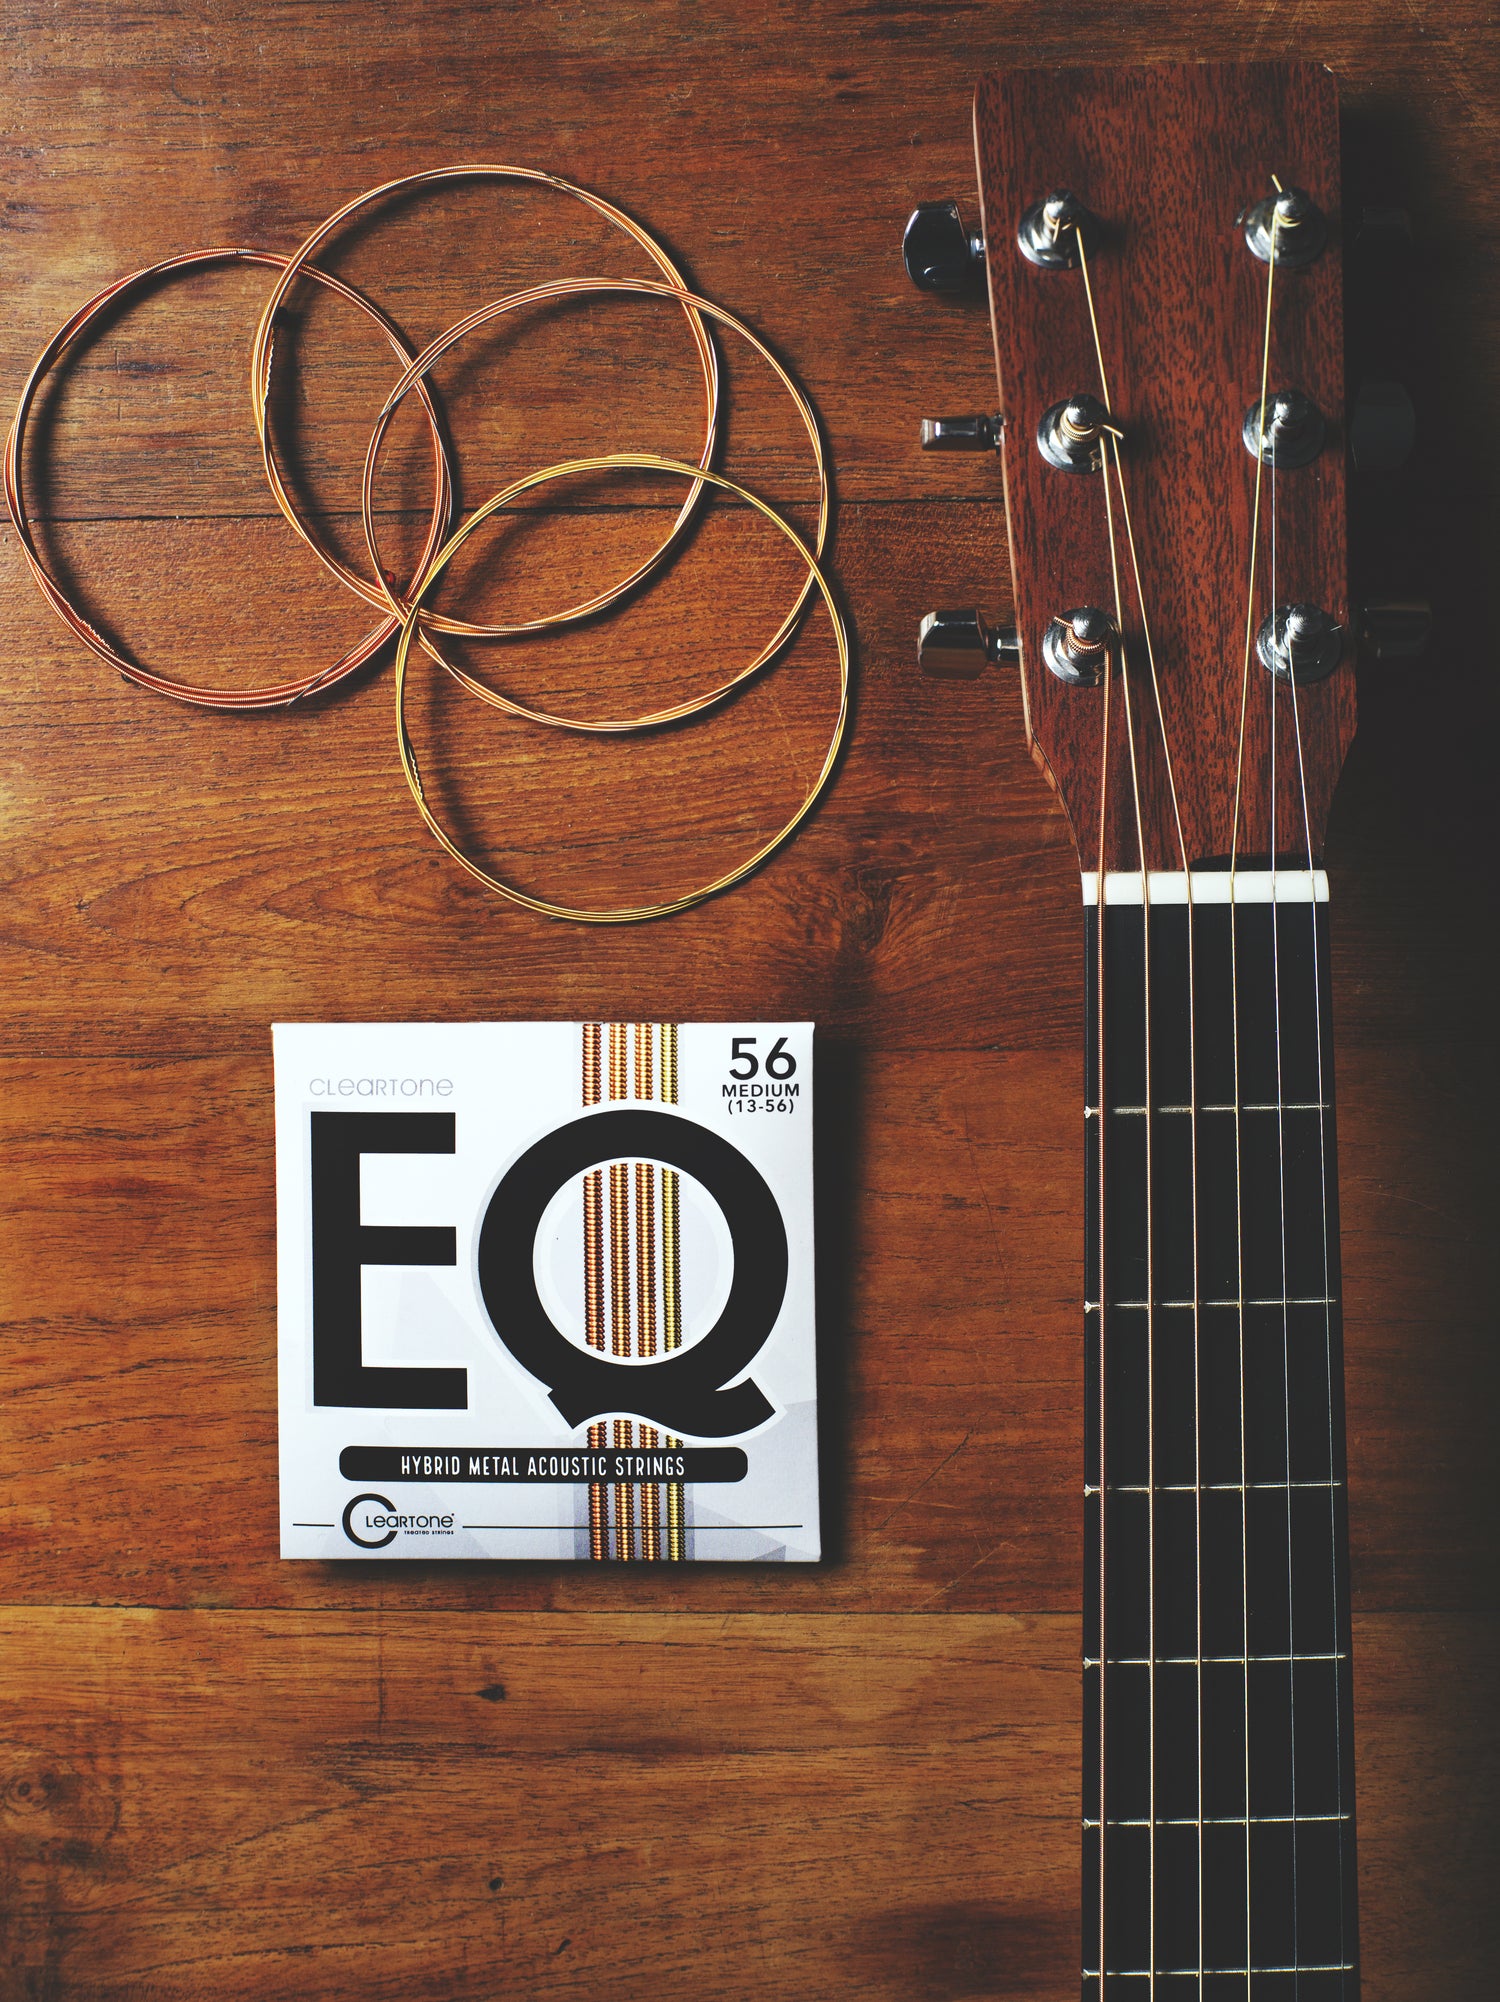 Cleartone Strings EQ packaging next to a guitar